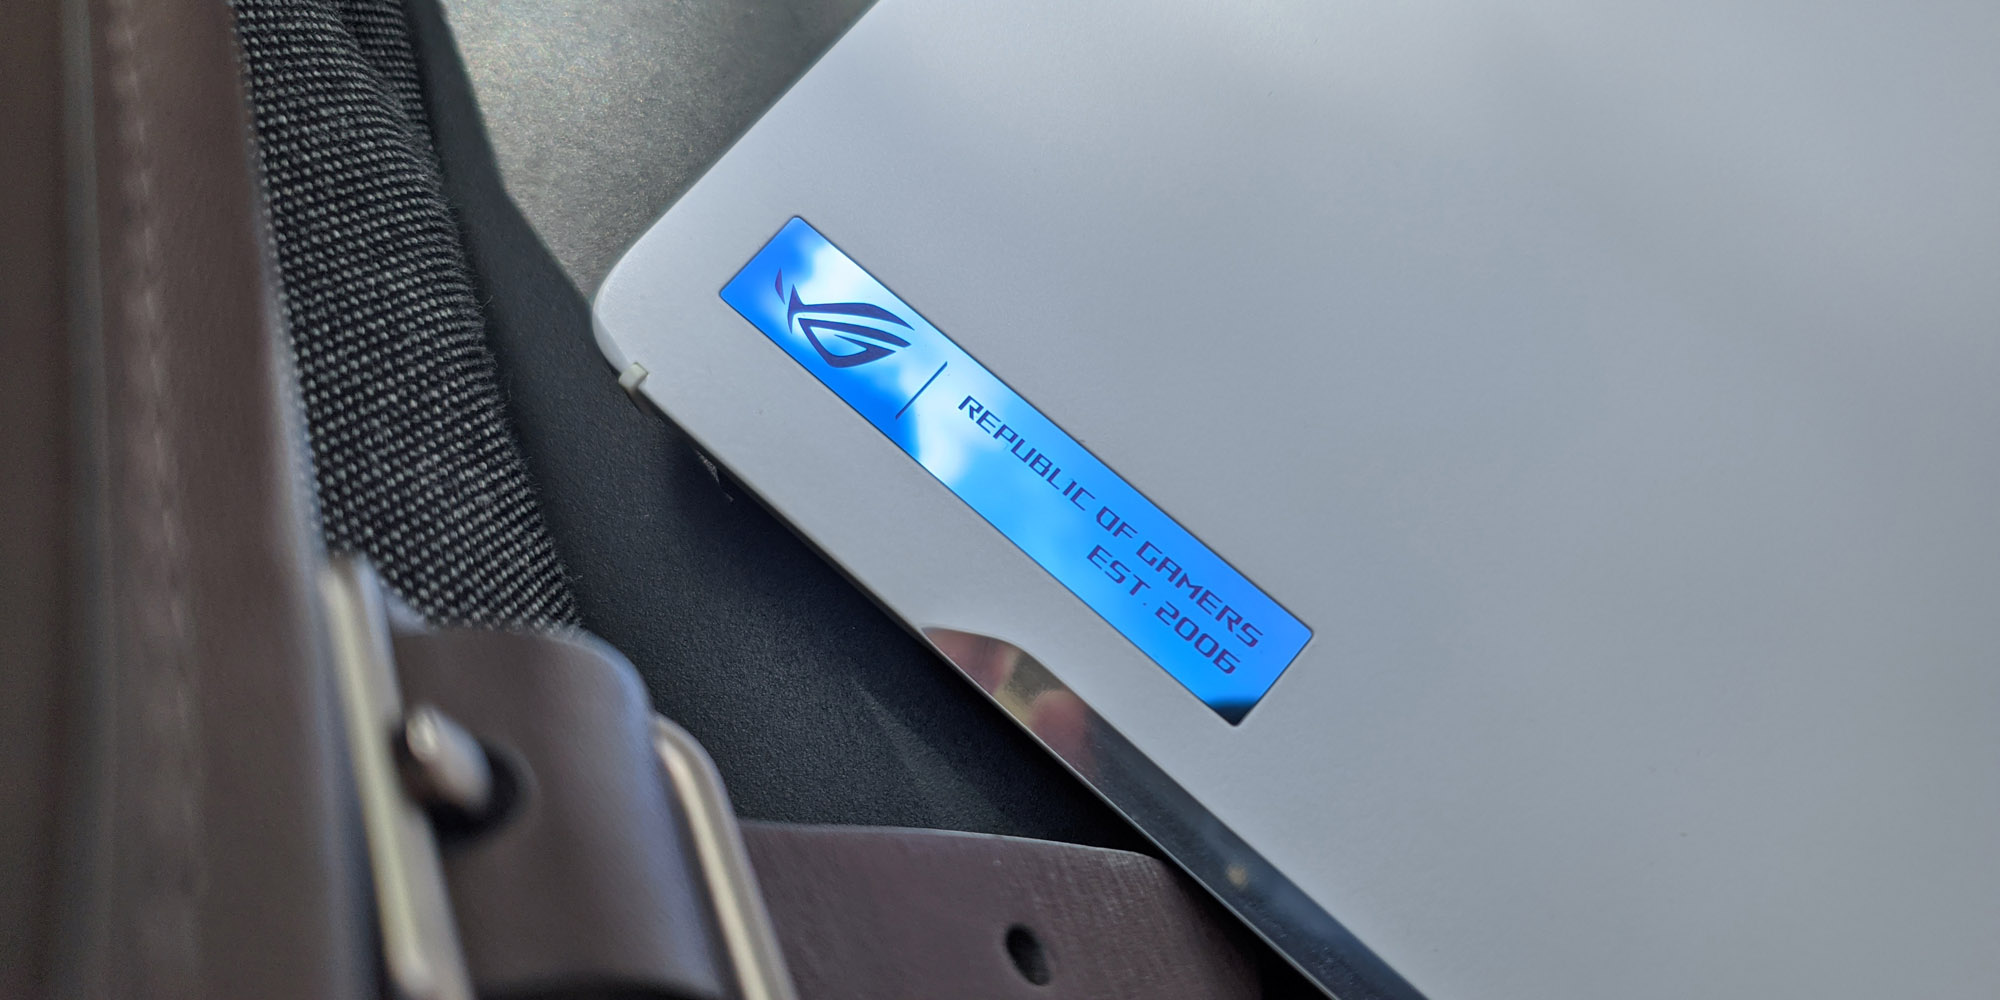 A close-up photo of the Zephyrus G14's blue metal badge with the ROG logo inscribed on it.